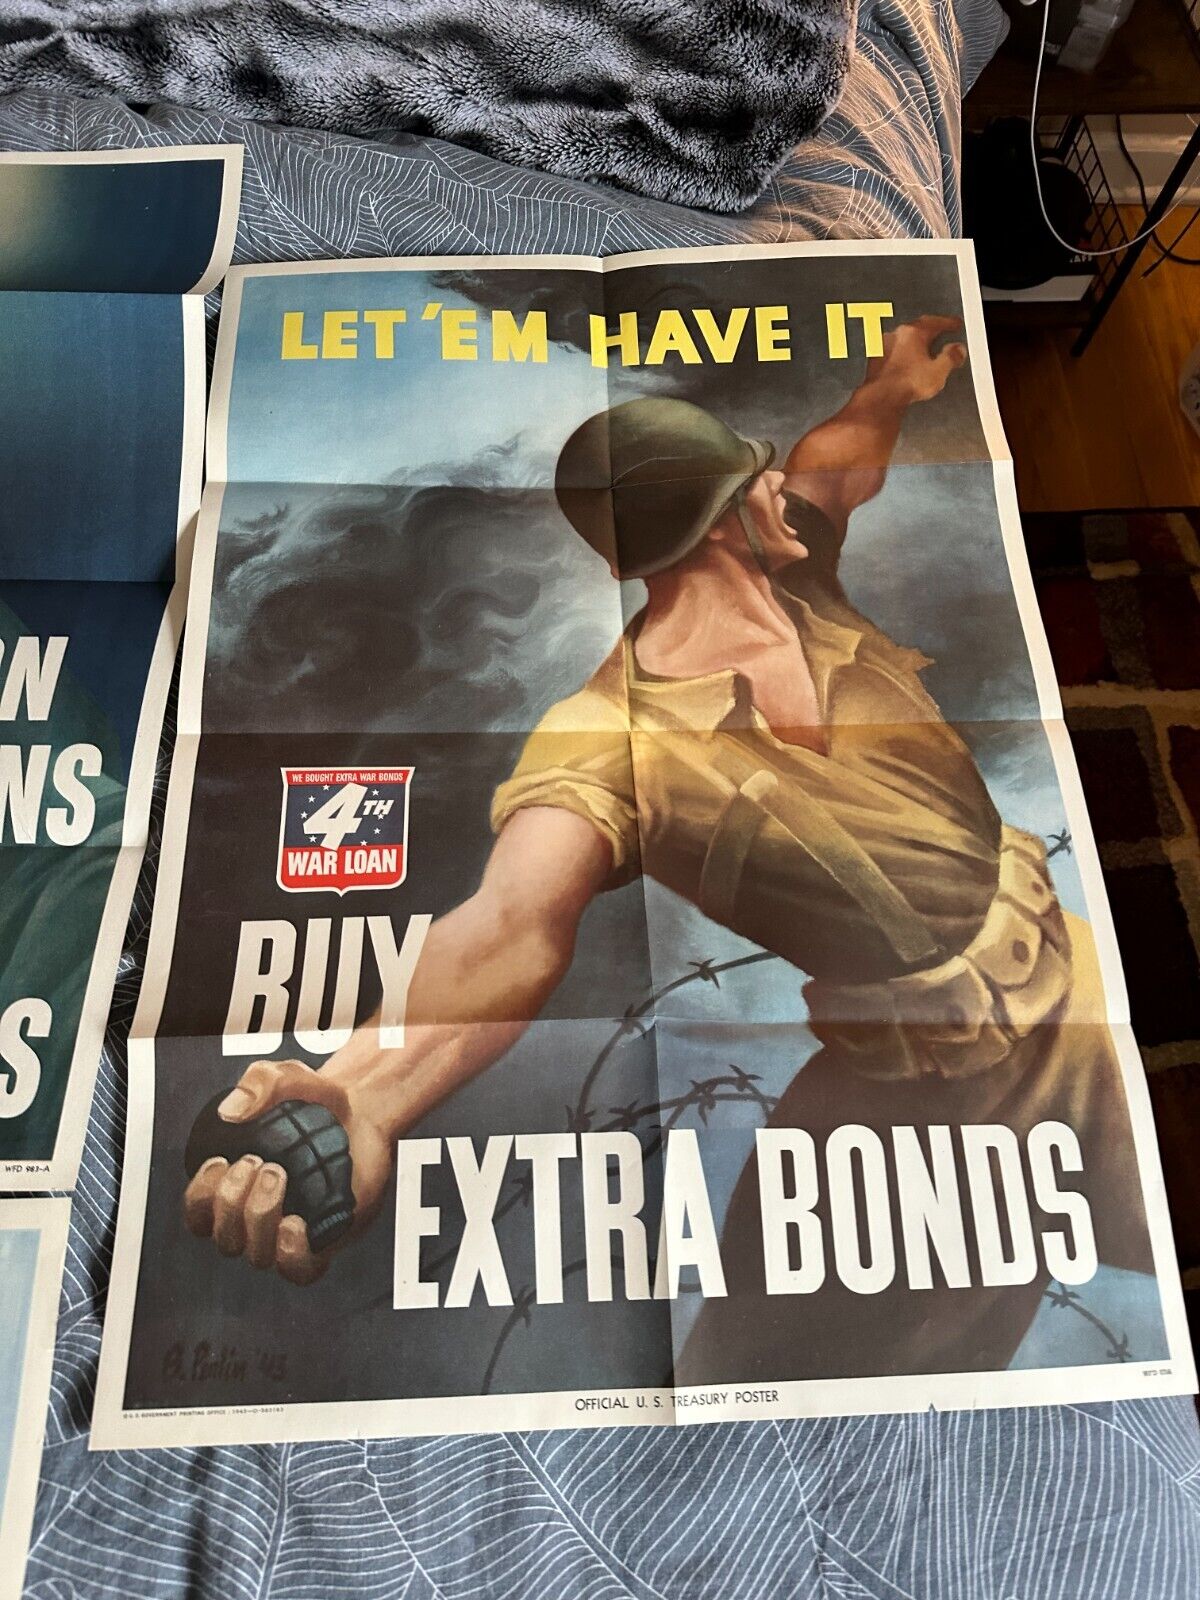 let 'em have it 4th war loan buy extra bonds poster WWII World war two